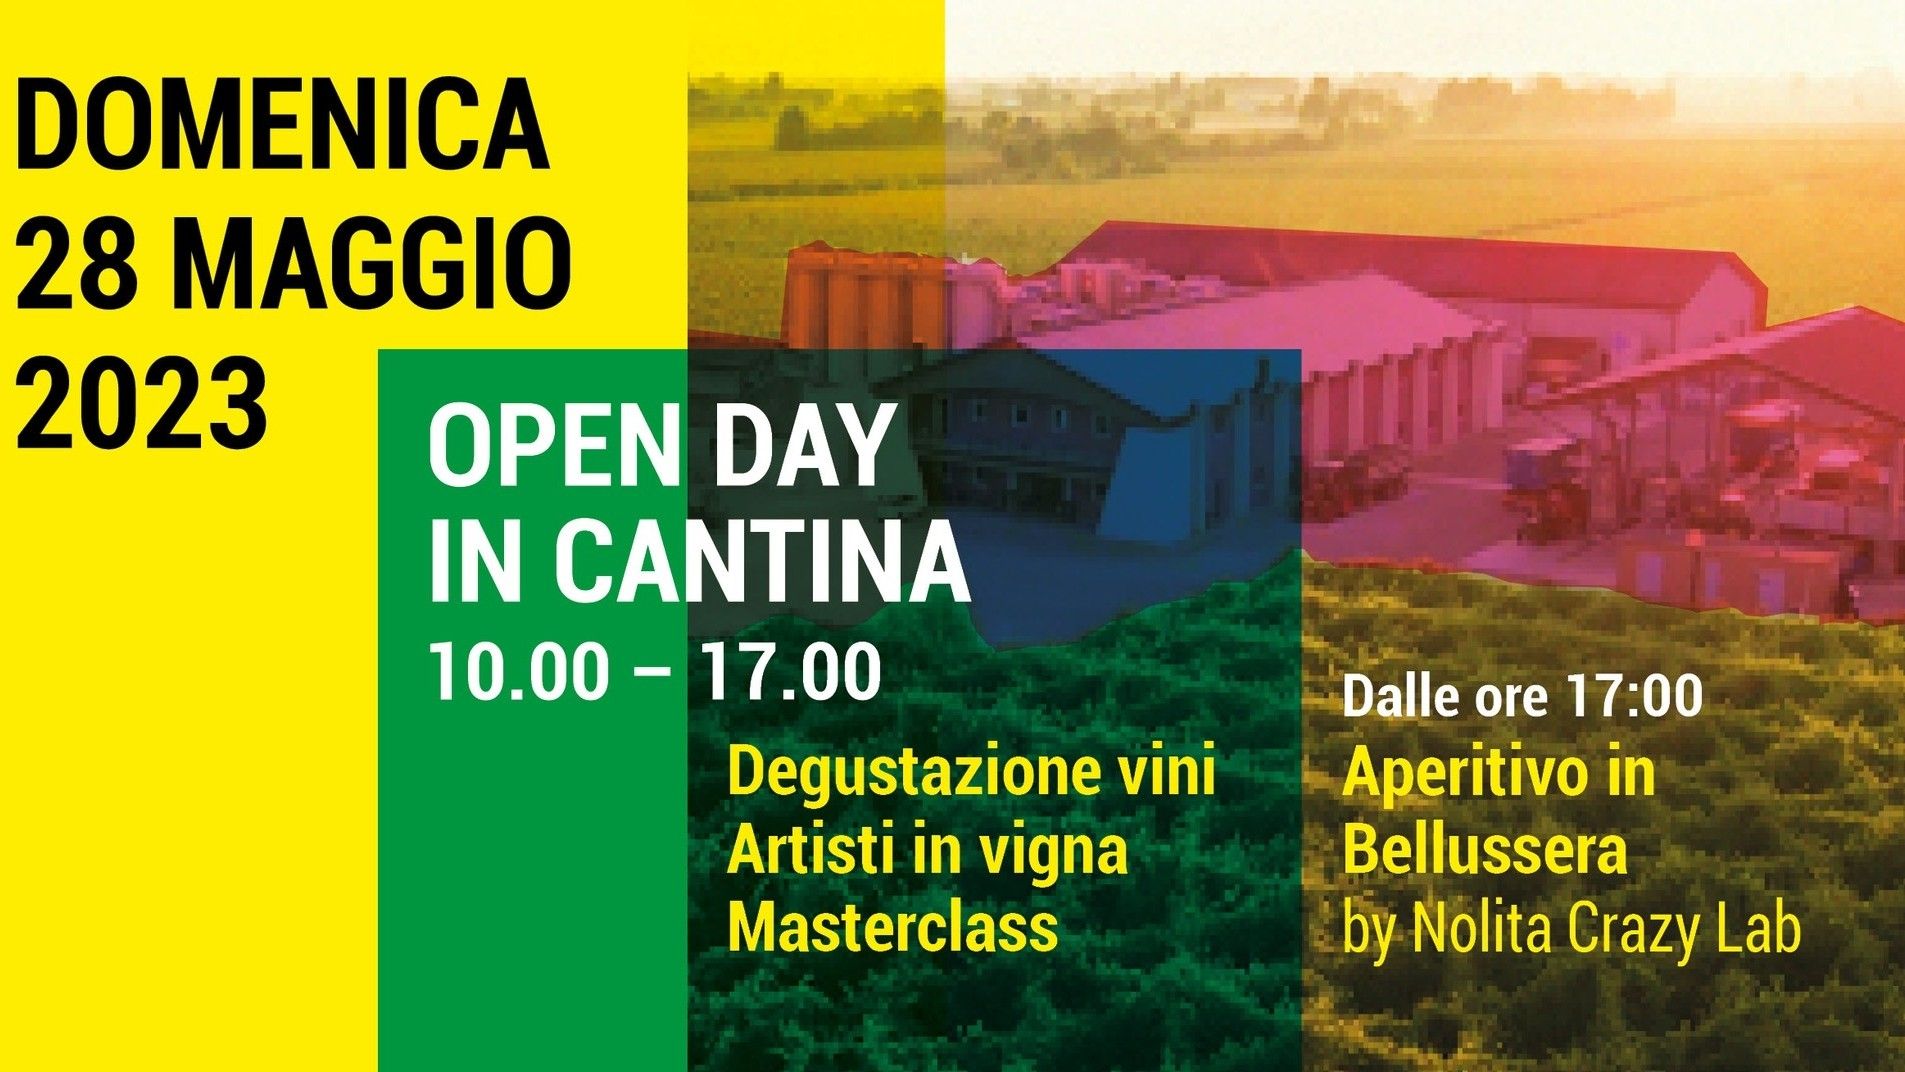 Open Day in Cantina 2023